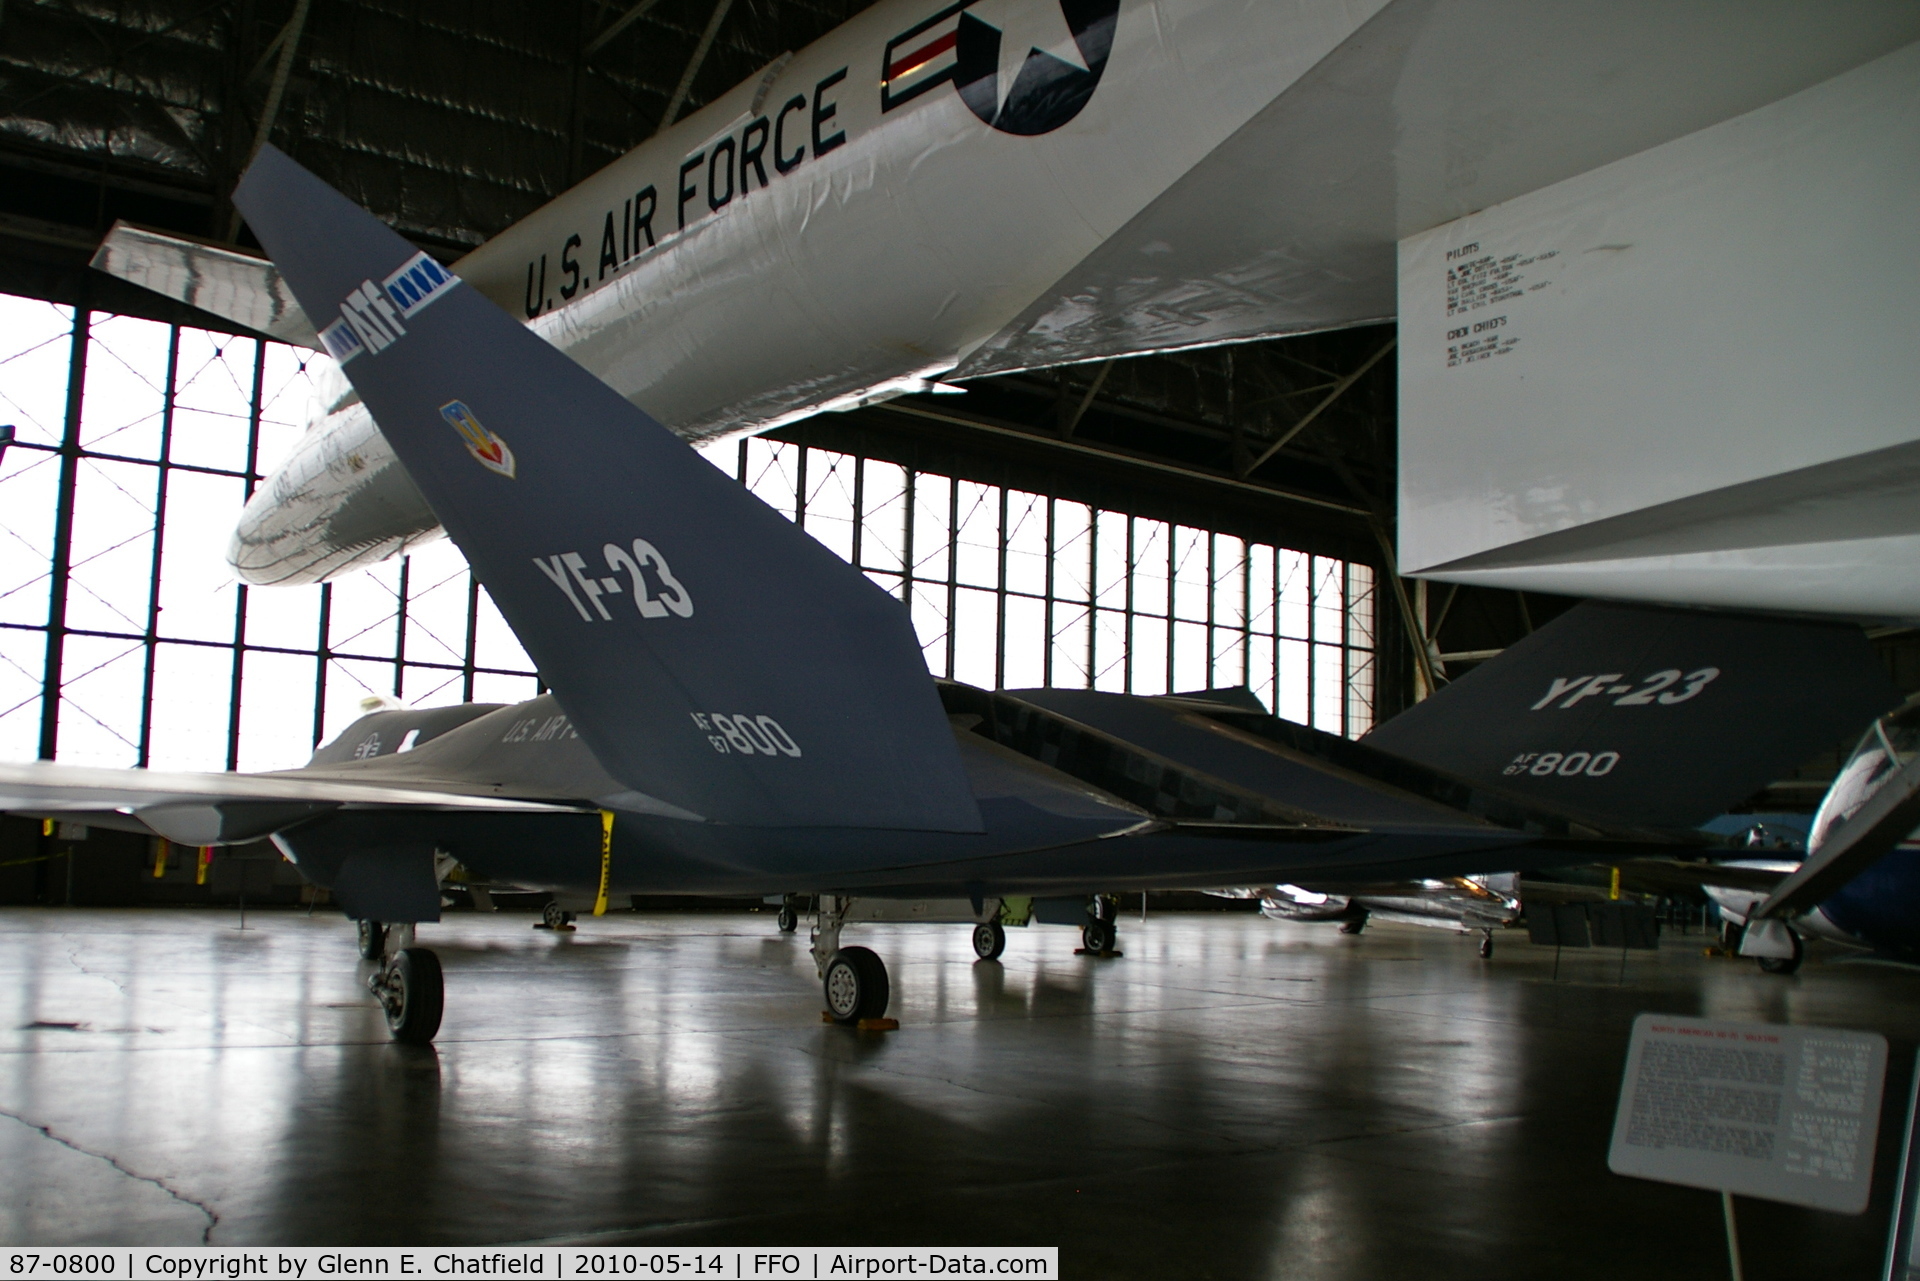 87-0800, 1990 Northrop YF-23A C/N PAV-1, In the R&D hangar of the National Museum of the USAF.